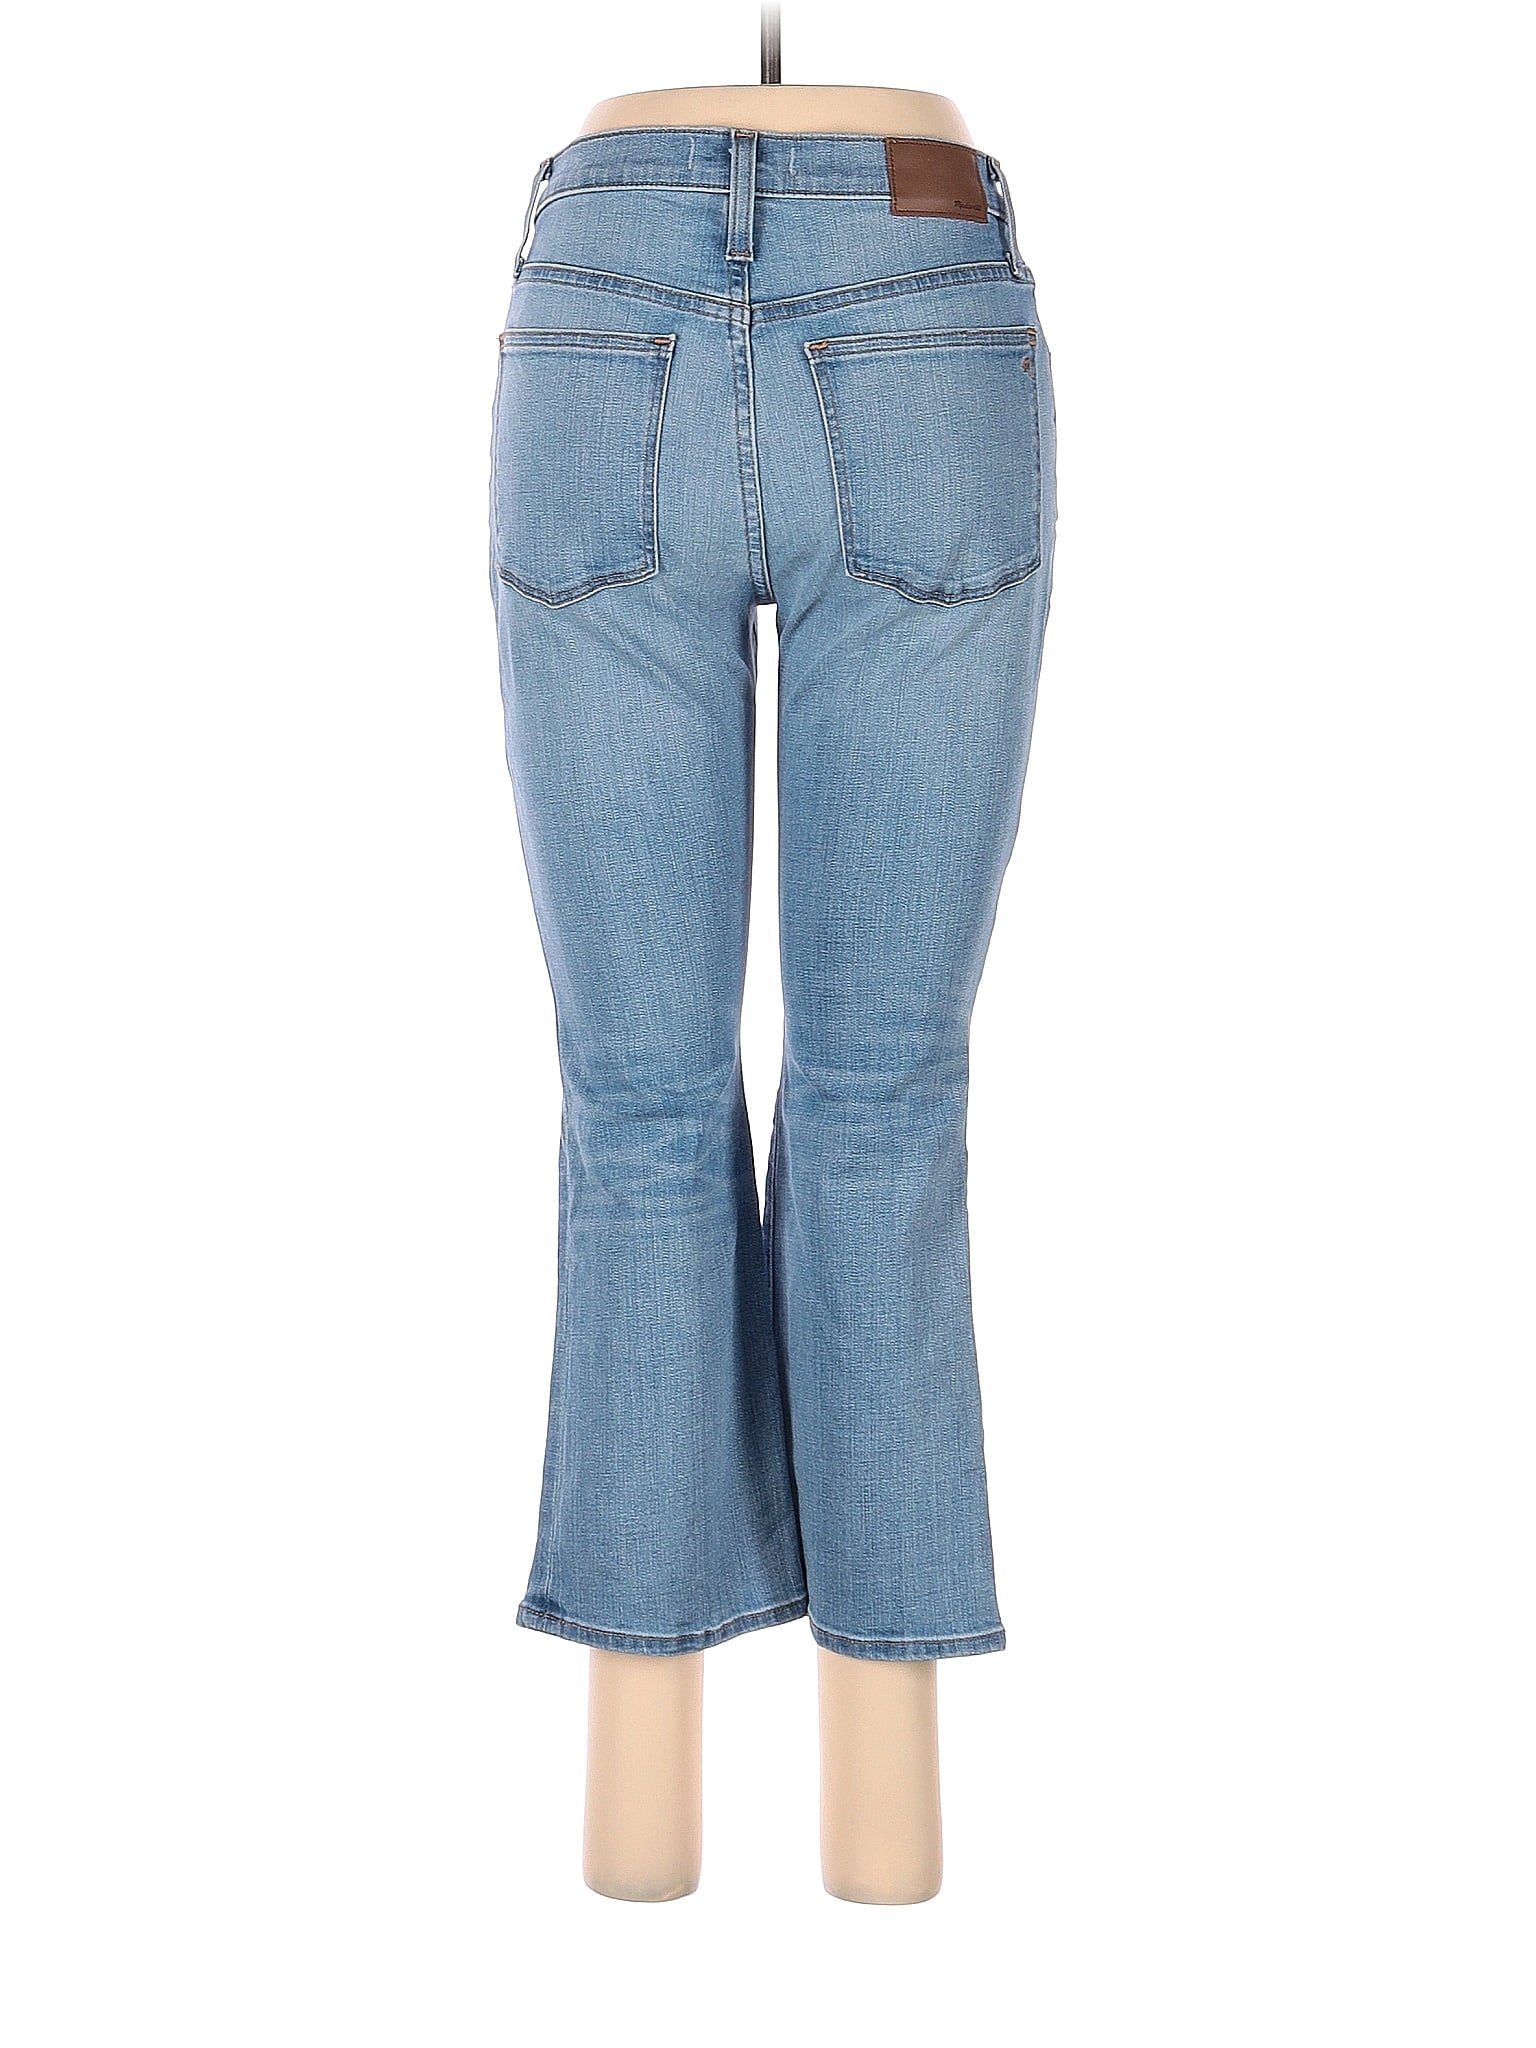 Mid-Rise Boyjeans Petite Cali Demi-Boot Jeans In Connolly Wash: Coolmax&reg; Denim Edition in Light Wash waist size - 27 P